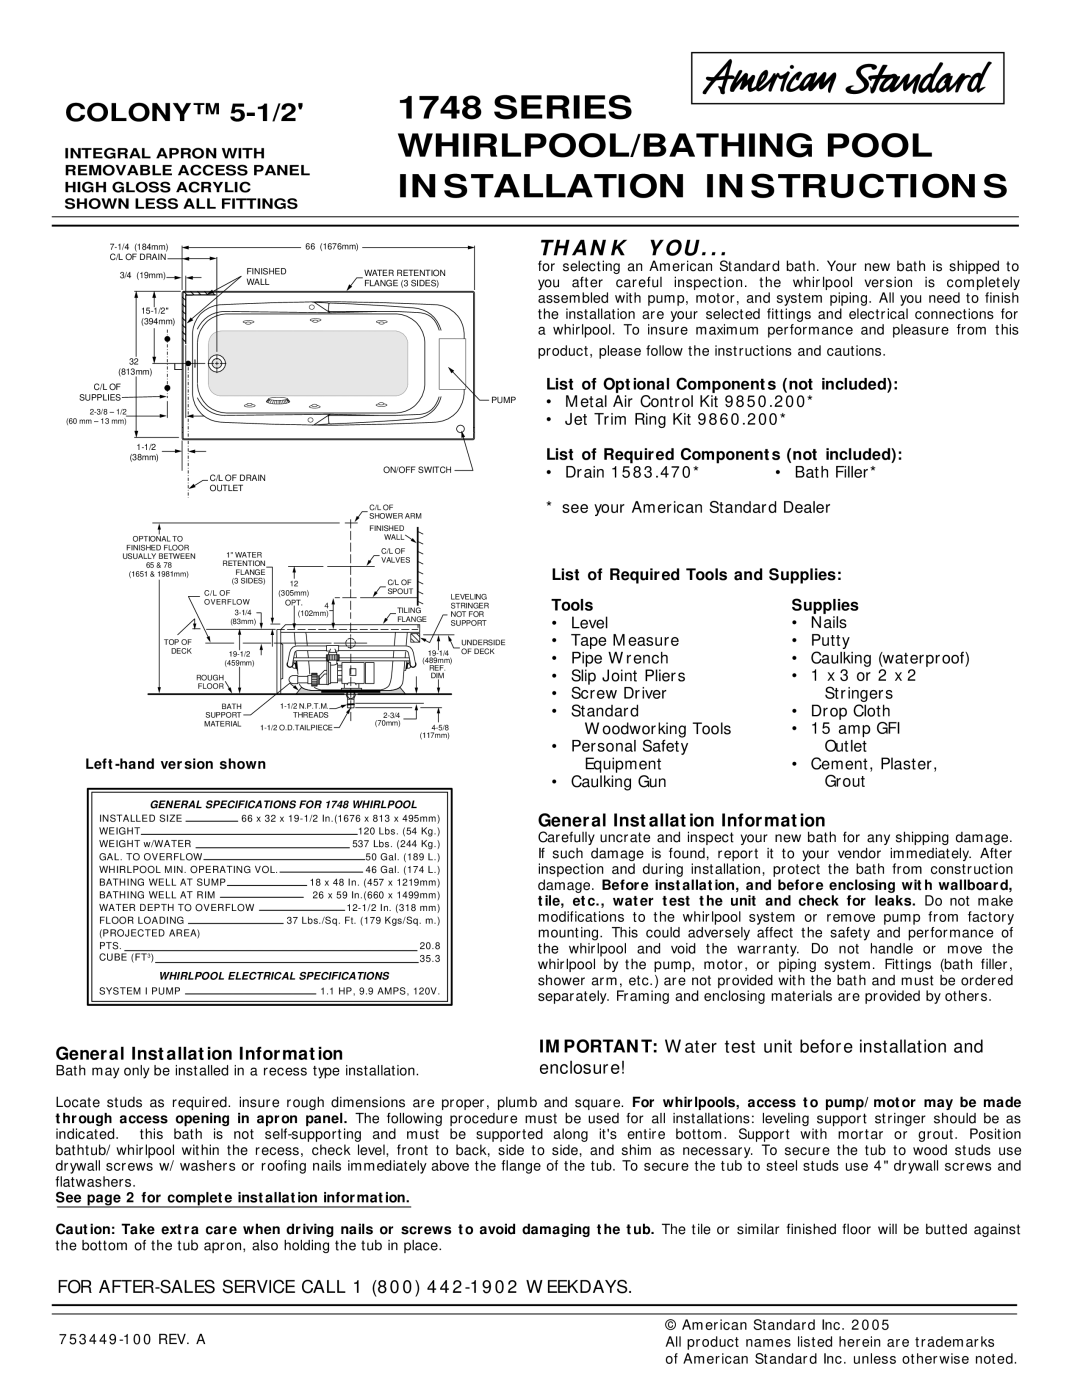 American Standard 1748 installation instructions General Installation Information, enclosure, Tools, Supplies, Thank You 